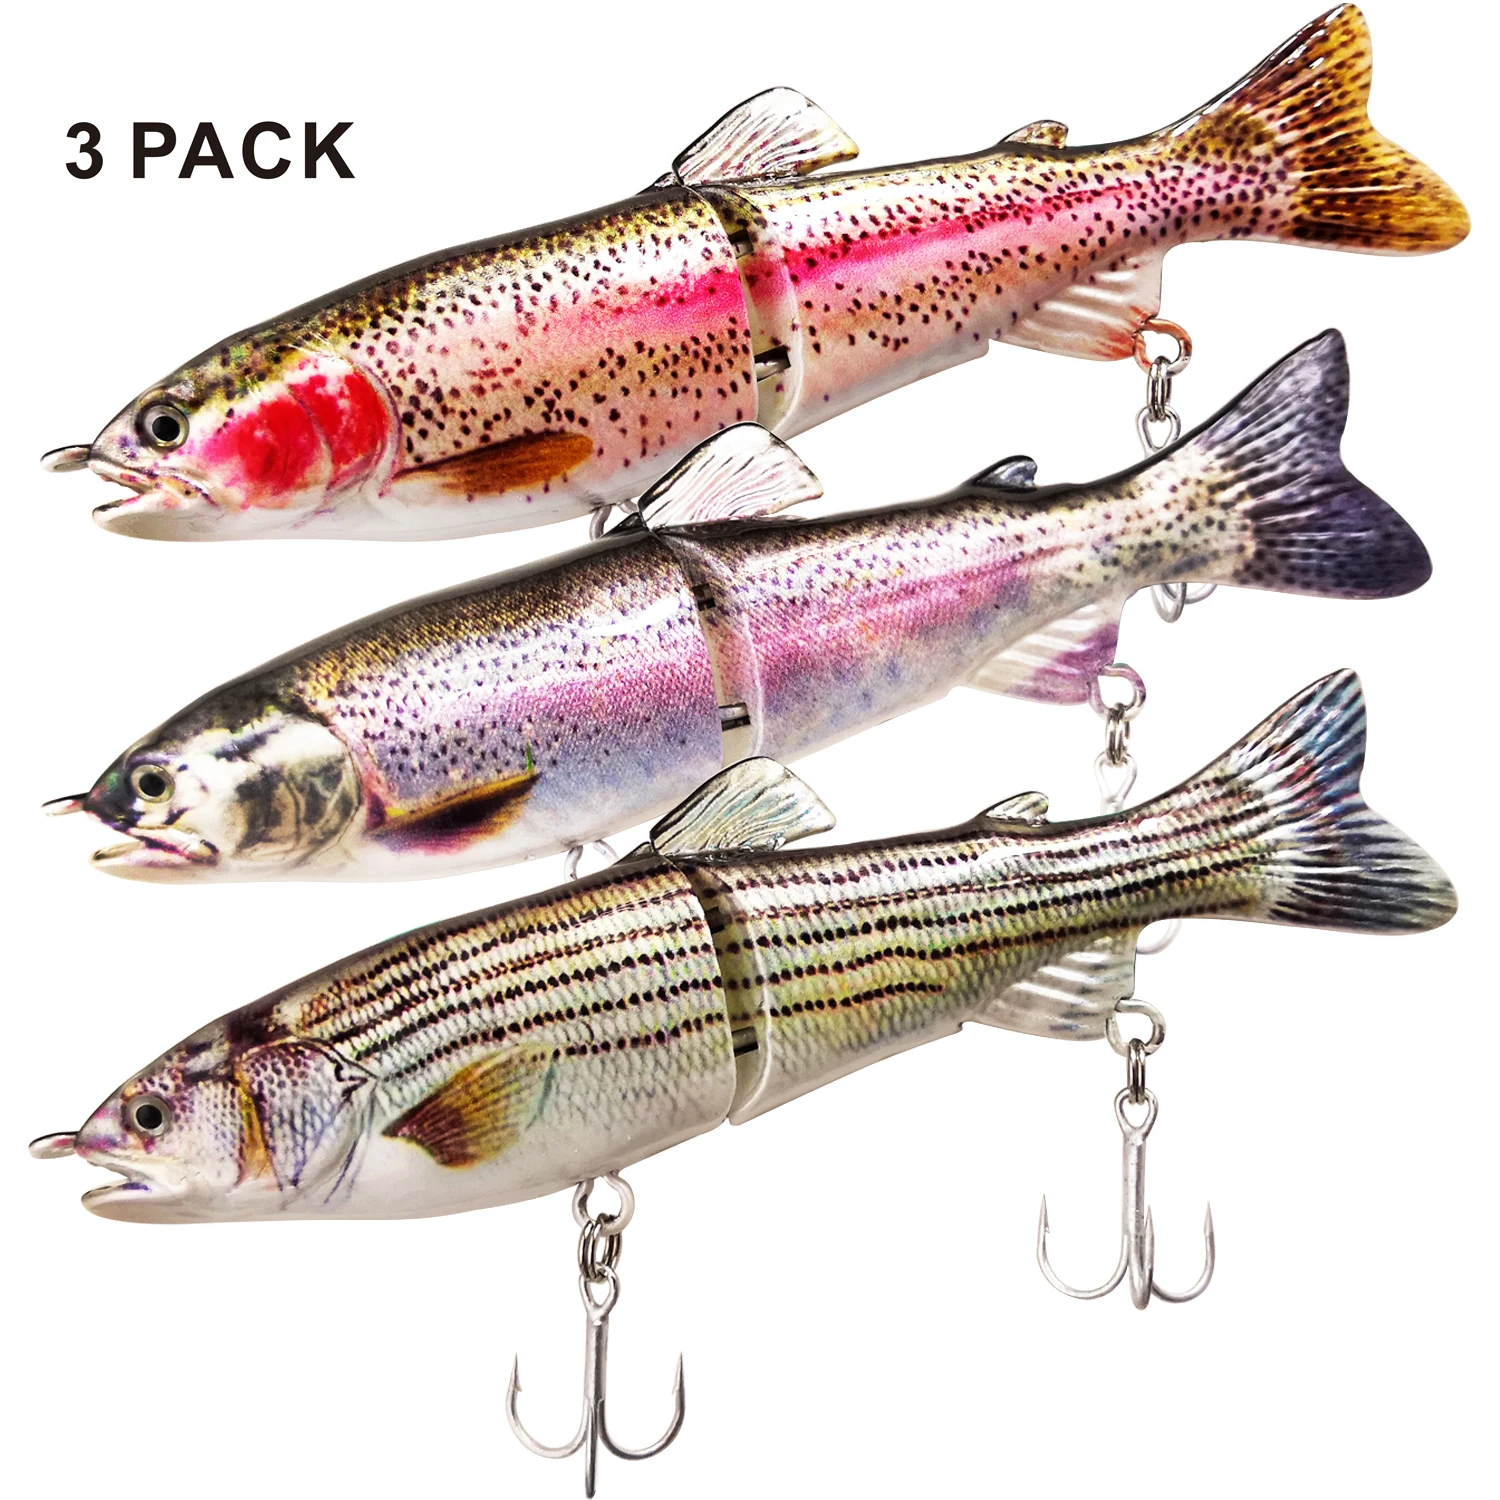 

ODS 185mm 66g 2 Sections multi Jointed fishing lure trout hard artificial bait for tuna Pike Bass Swimbait, Lifelike colors, any color you want